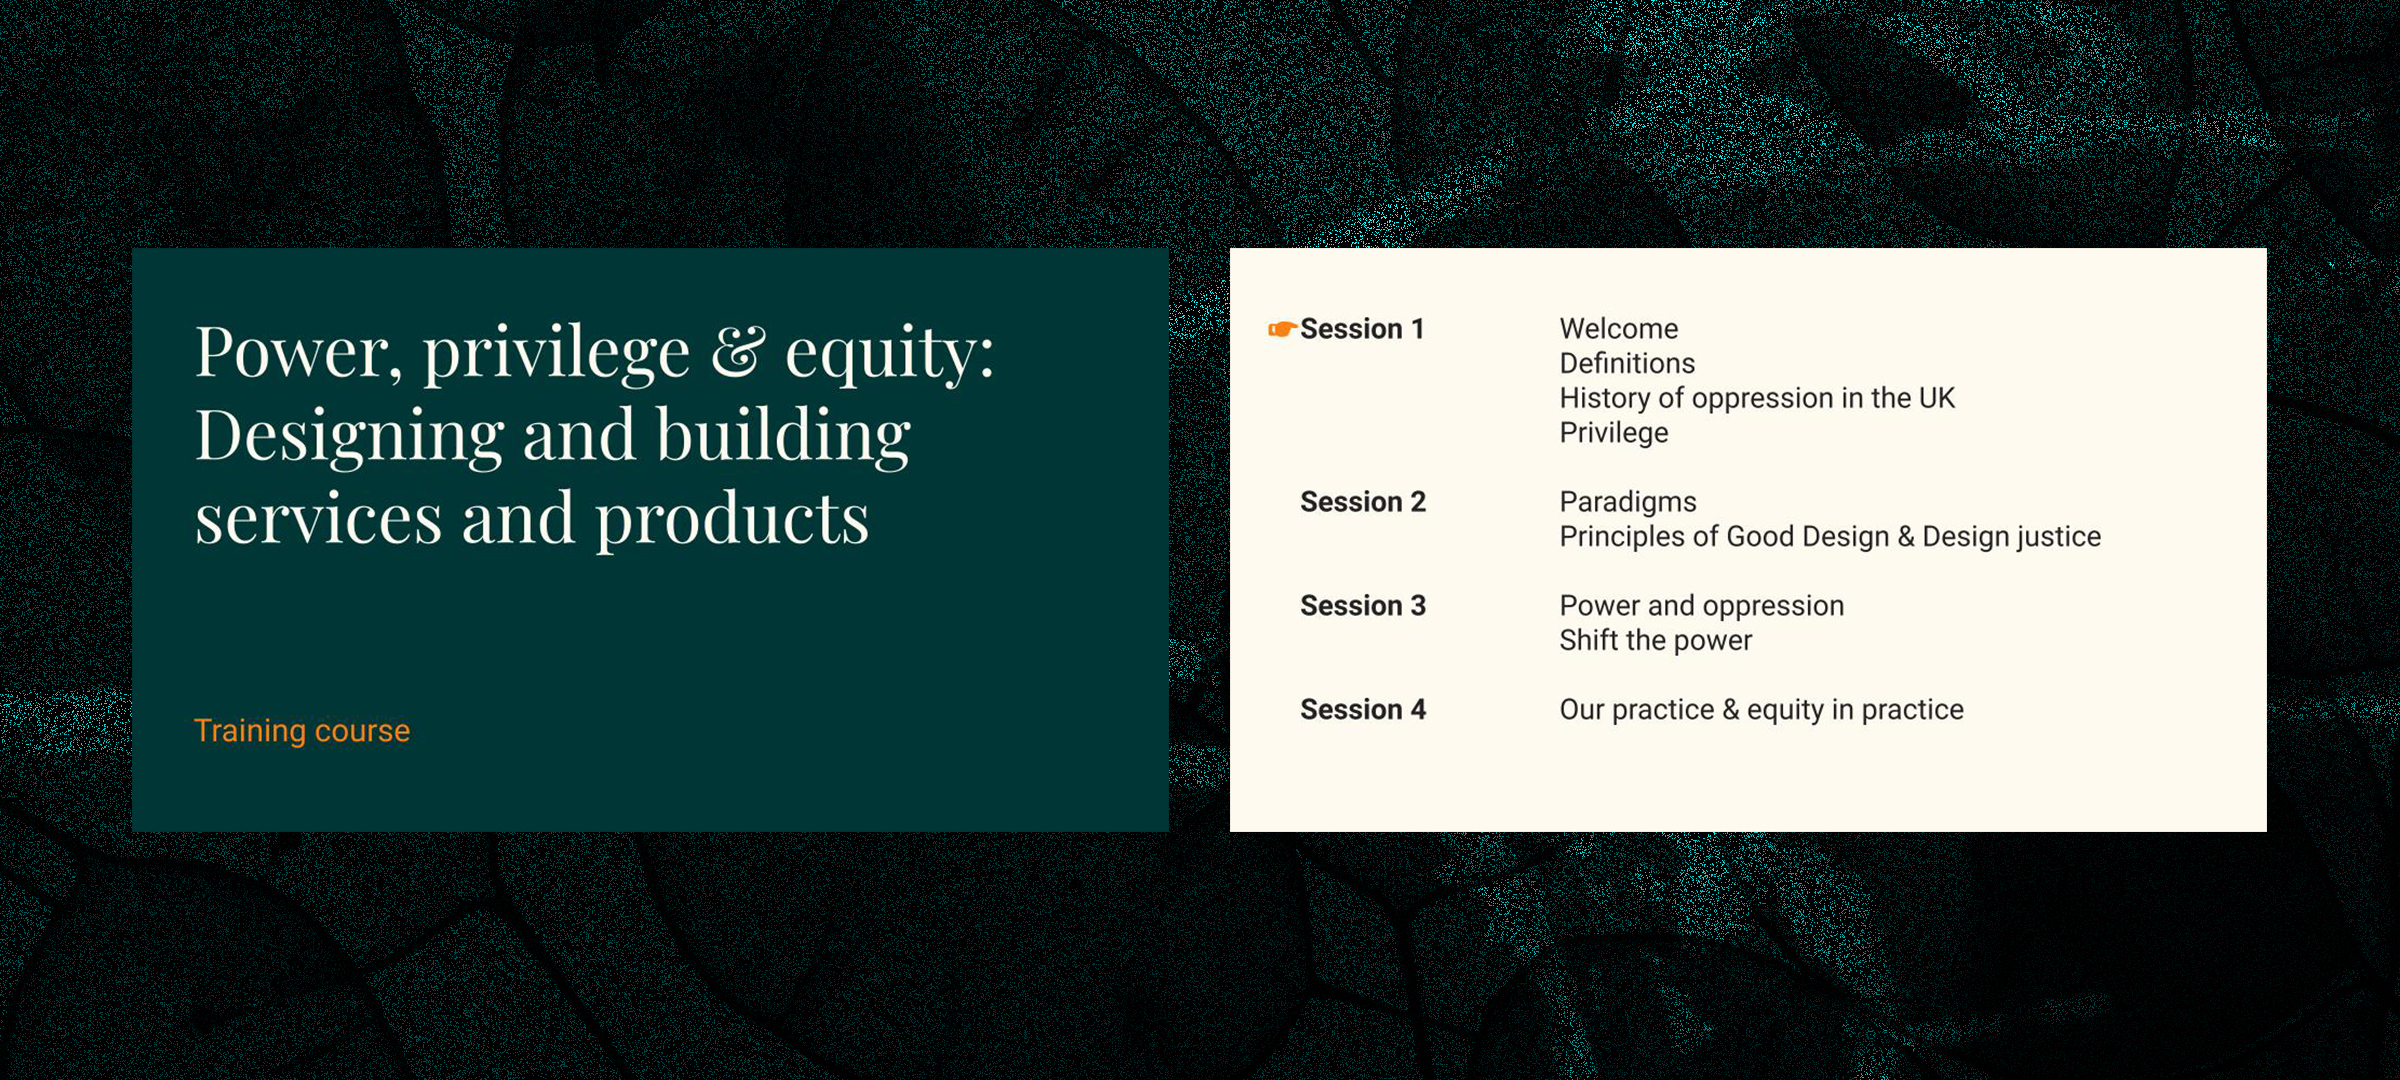 The title page saying: Power, privilege and equity: Designing and building services and products
Training course. The contents page showing the course split over 4 days